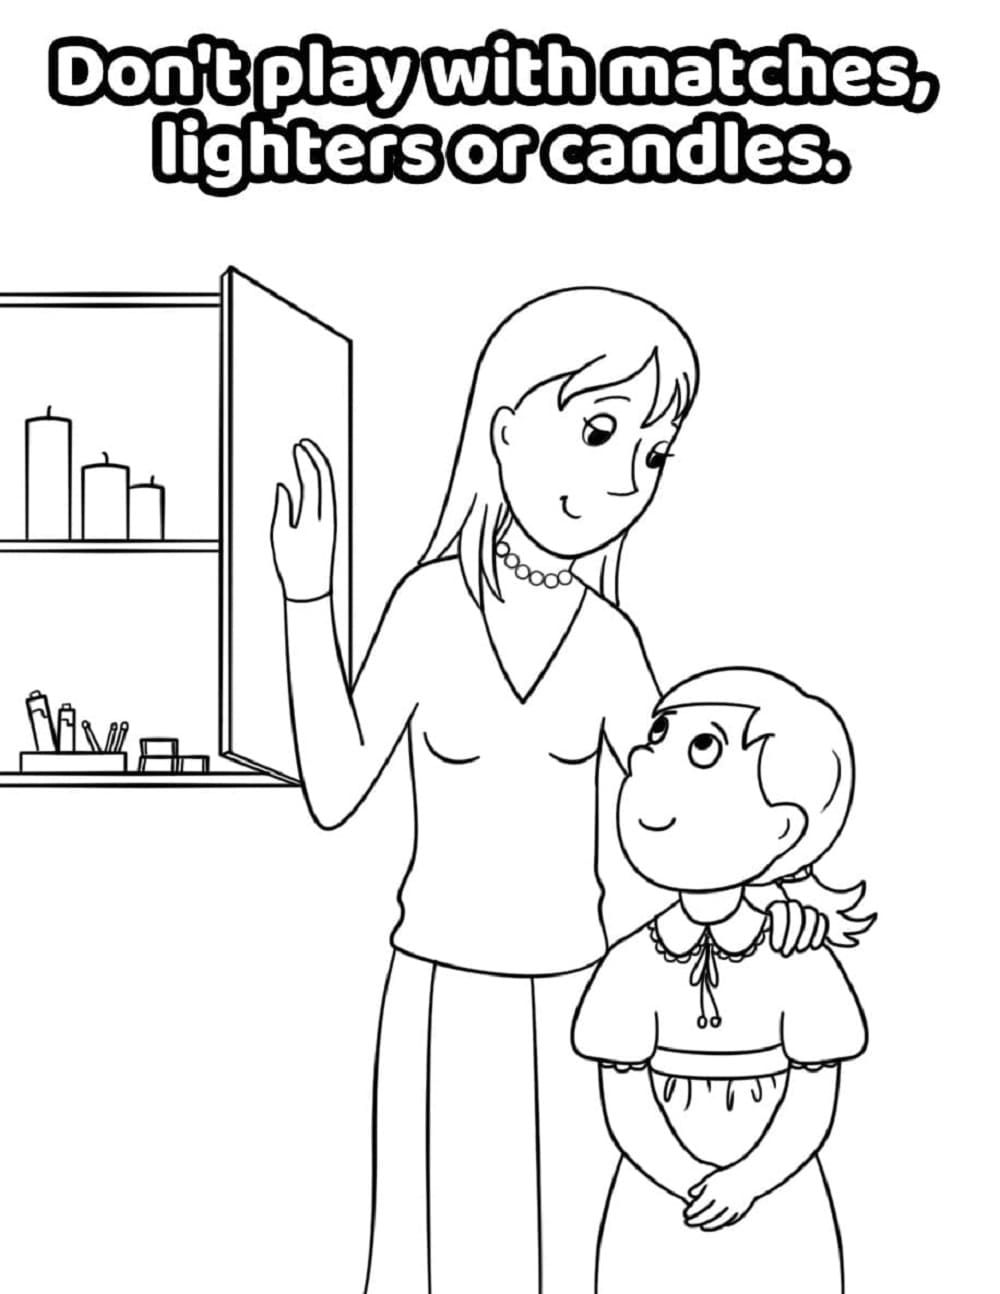 Printable Fire Safety Don't Play with Matches Coloring Page